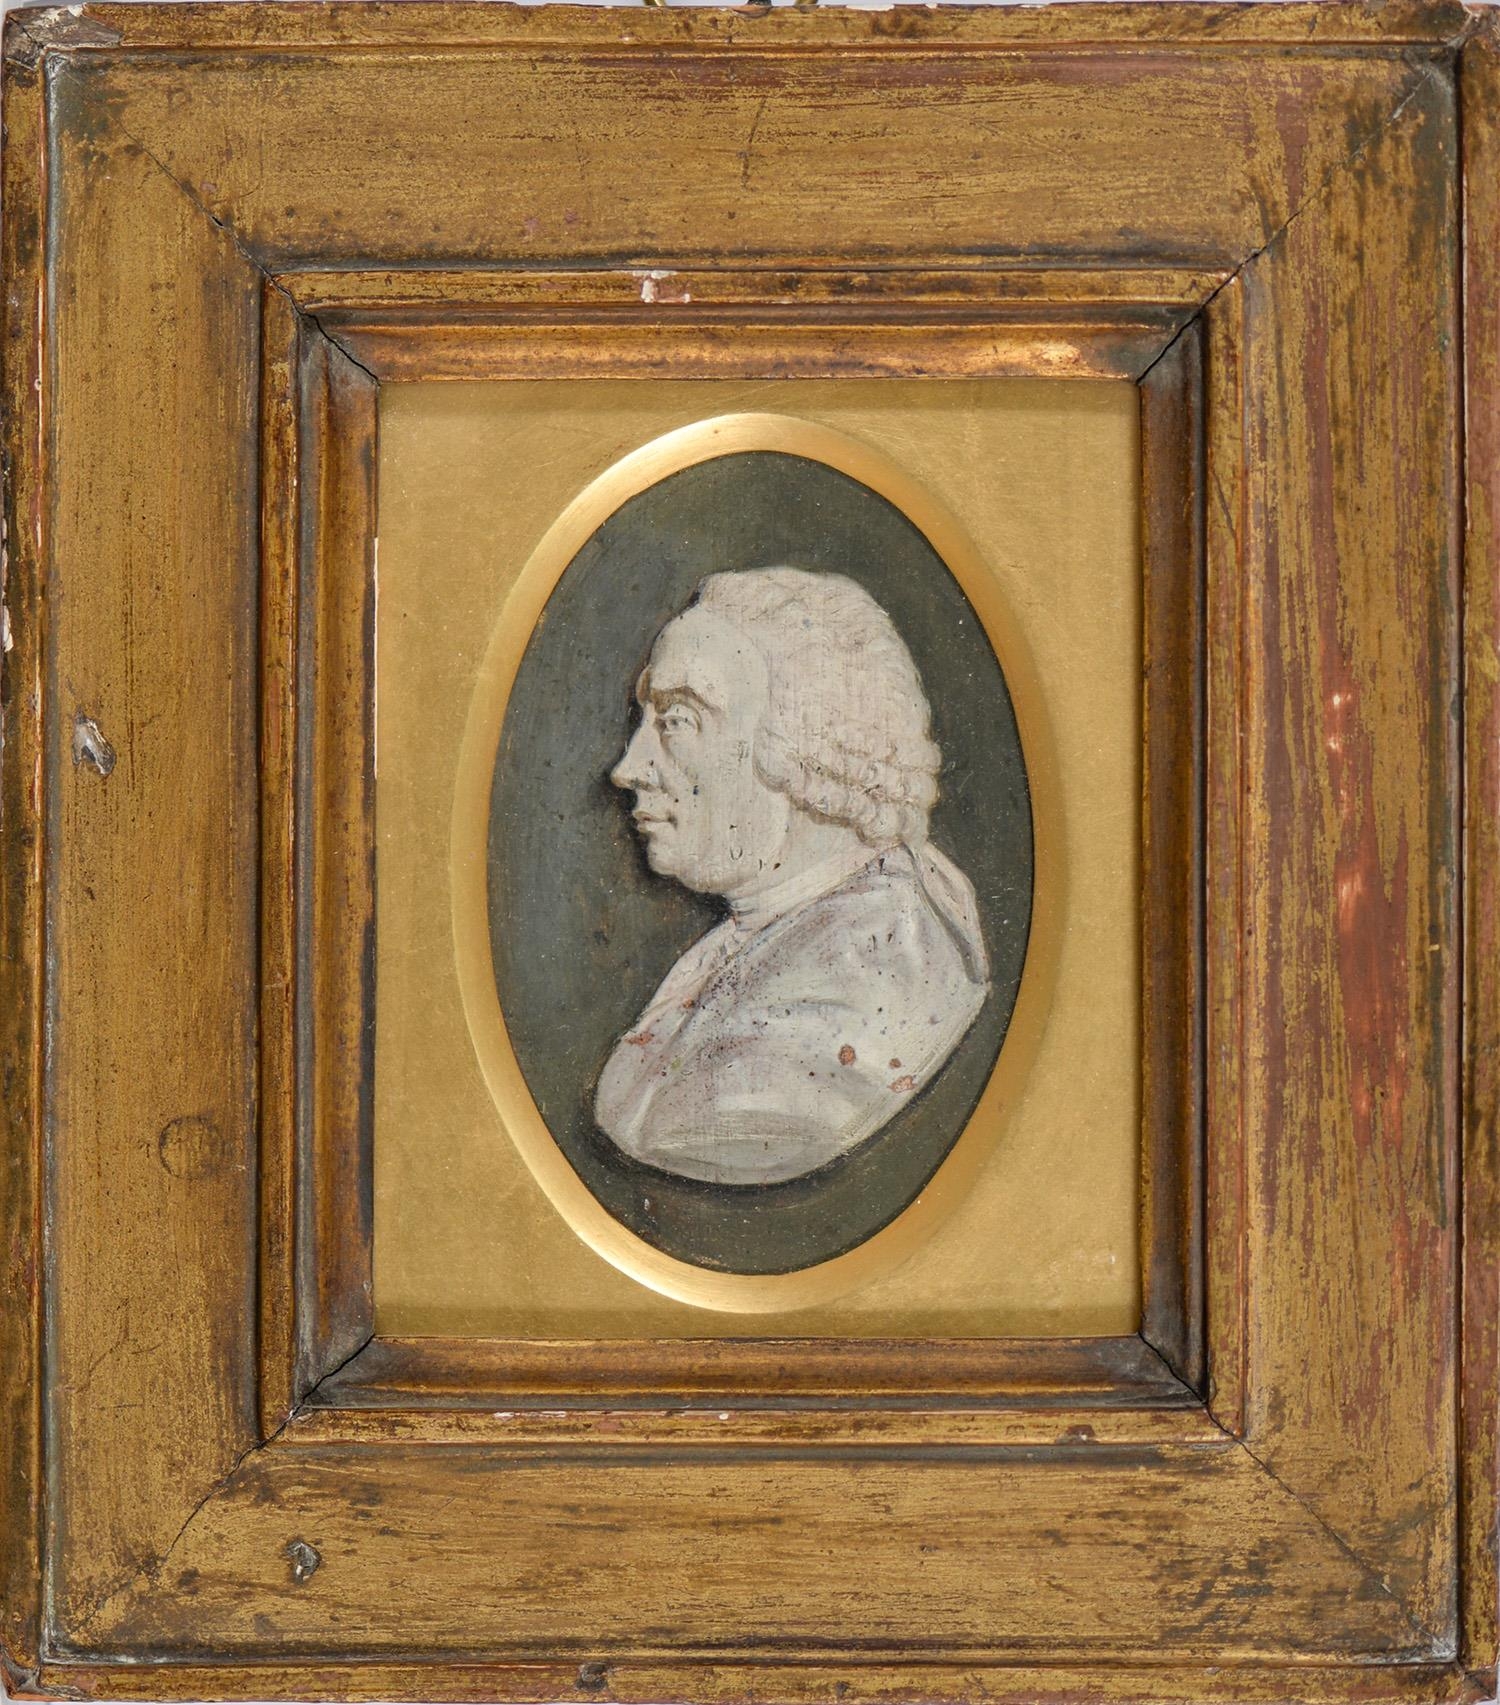 English School (18th century) - Portrait of a Gentleman, possibly George III, bust-length and in - Image 2 of 3